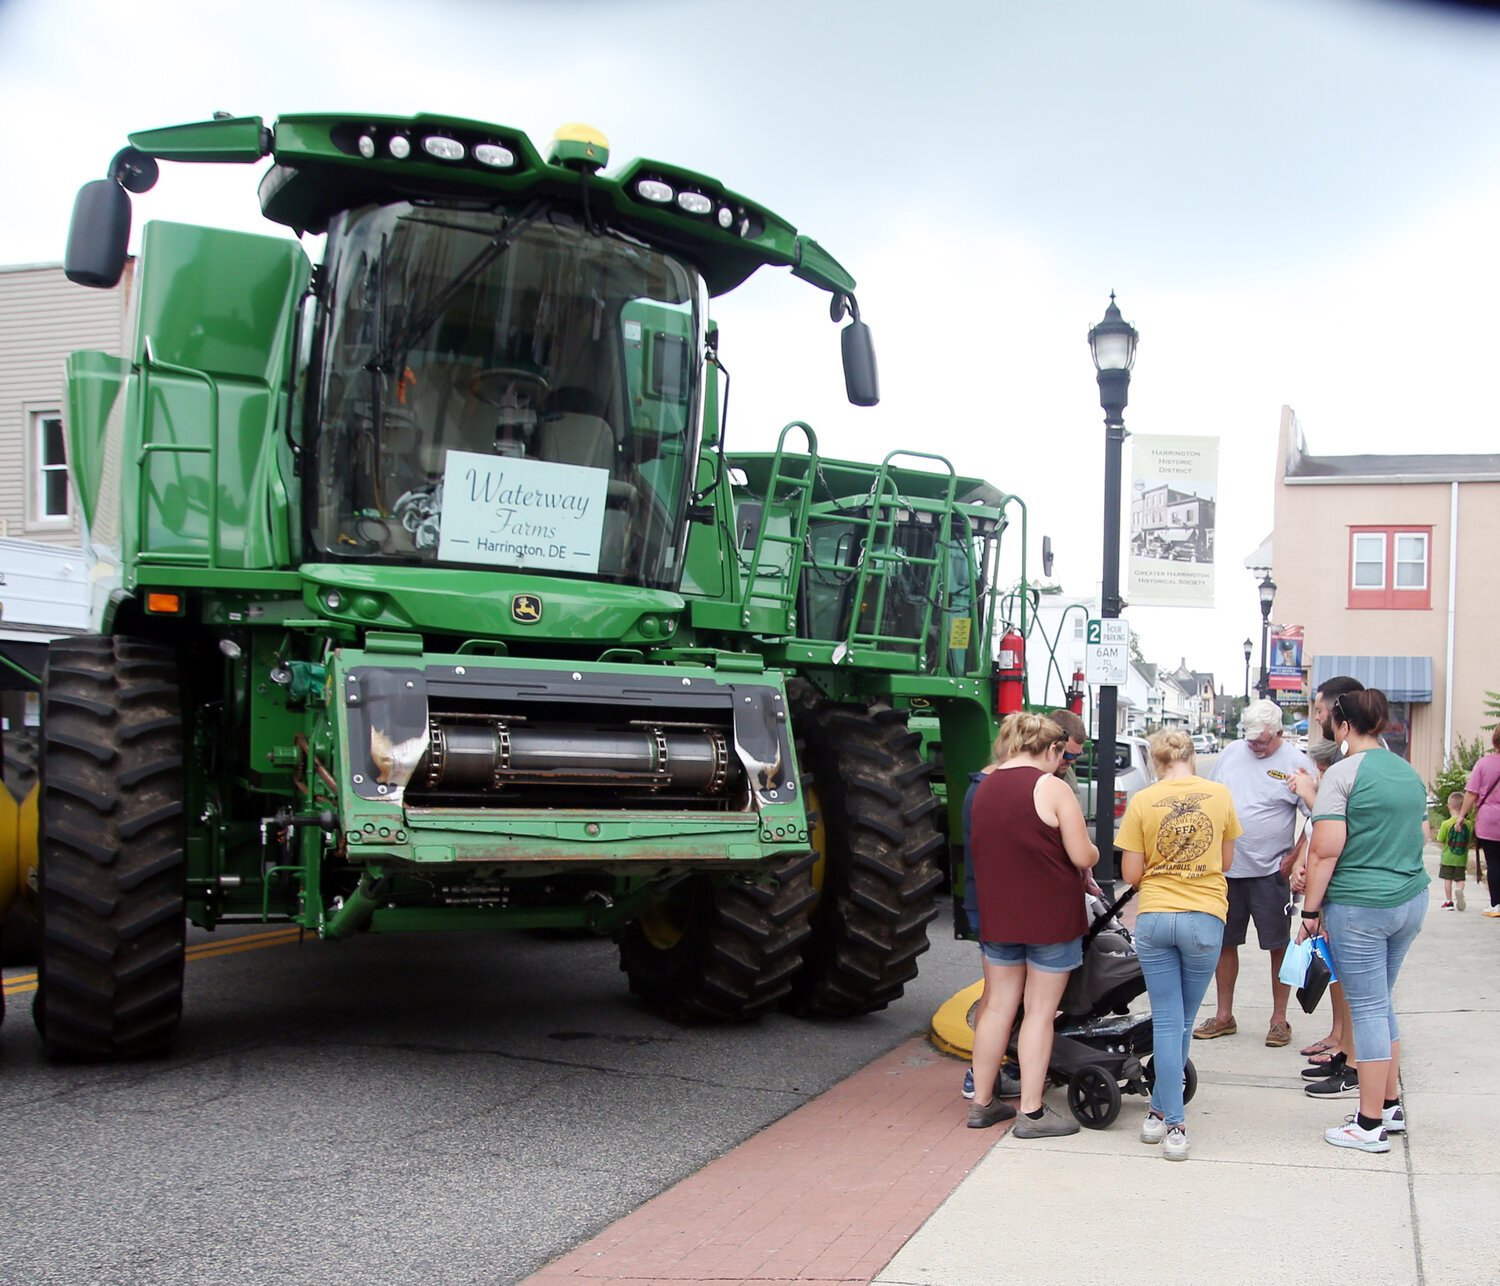 Caleb Dunn, lead pastor of Calvary Wesleyan Church in Harrington, leads a "Blessing of the Combines" Saturday at Harrington Heritage Day. Dale Blessing, Melissa Blessing and Kellie Yeager were there from the Waterway Farm. Harry Raughley of the Taylor and Messick John Deere dealership drove in the second combine.